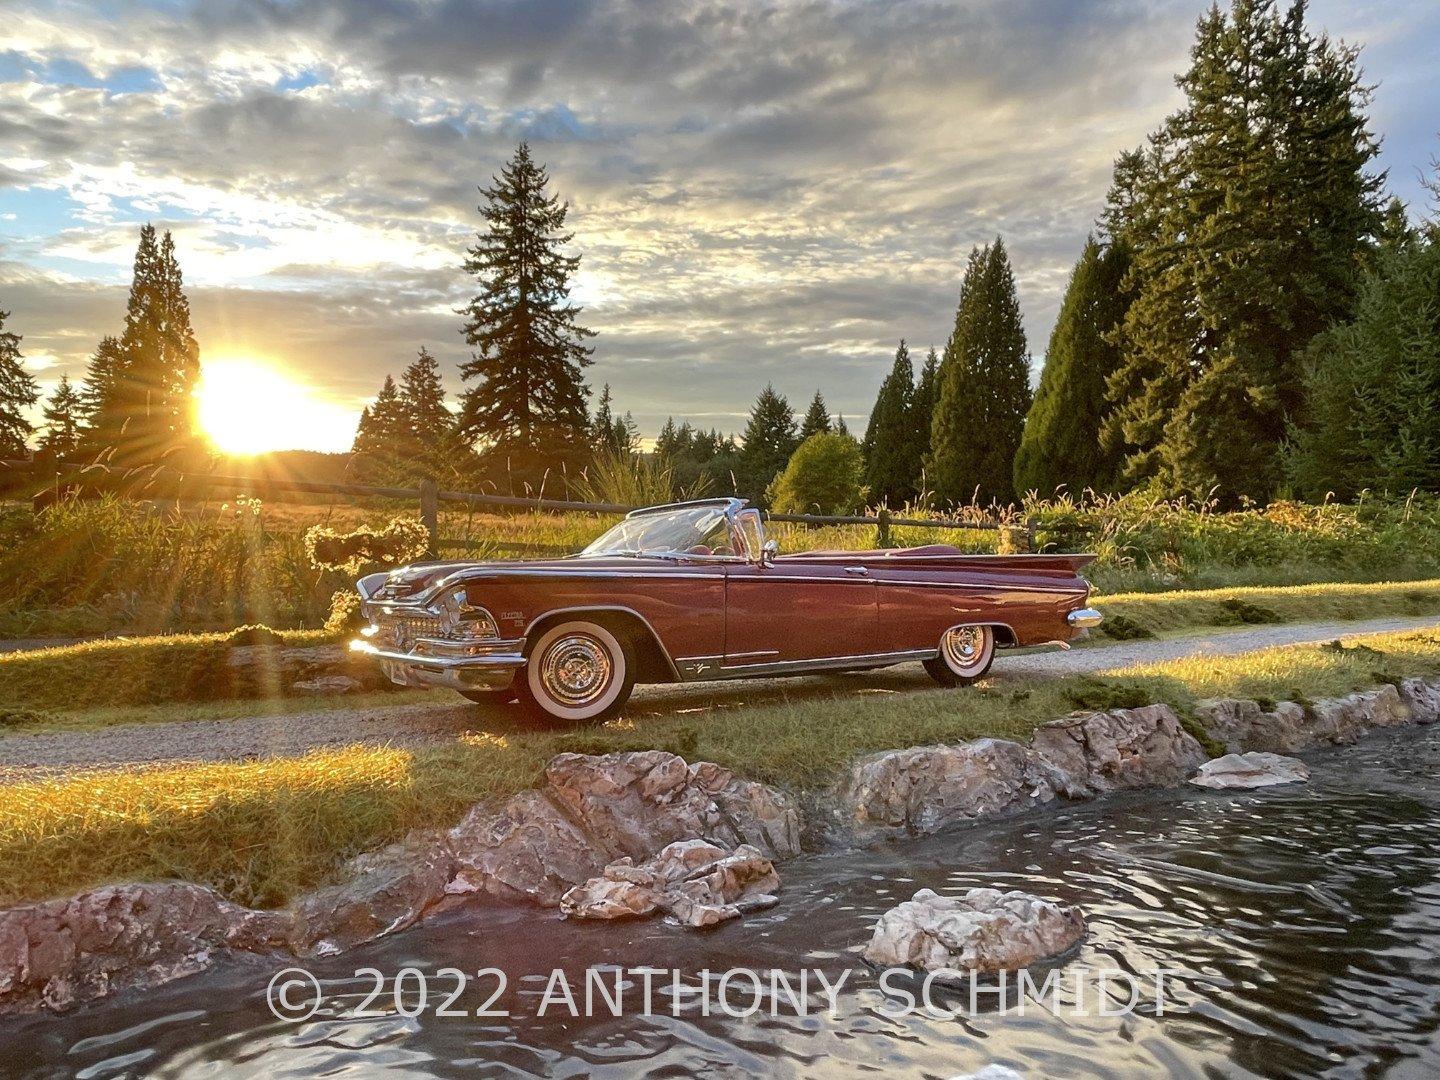 1959 Buick Electra (4 of 4)